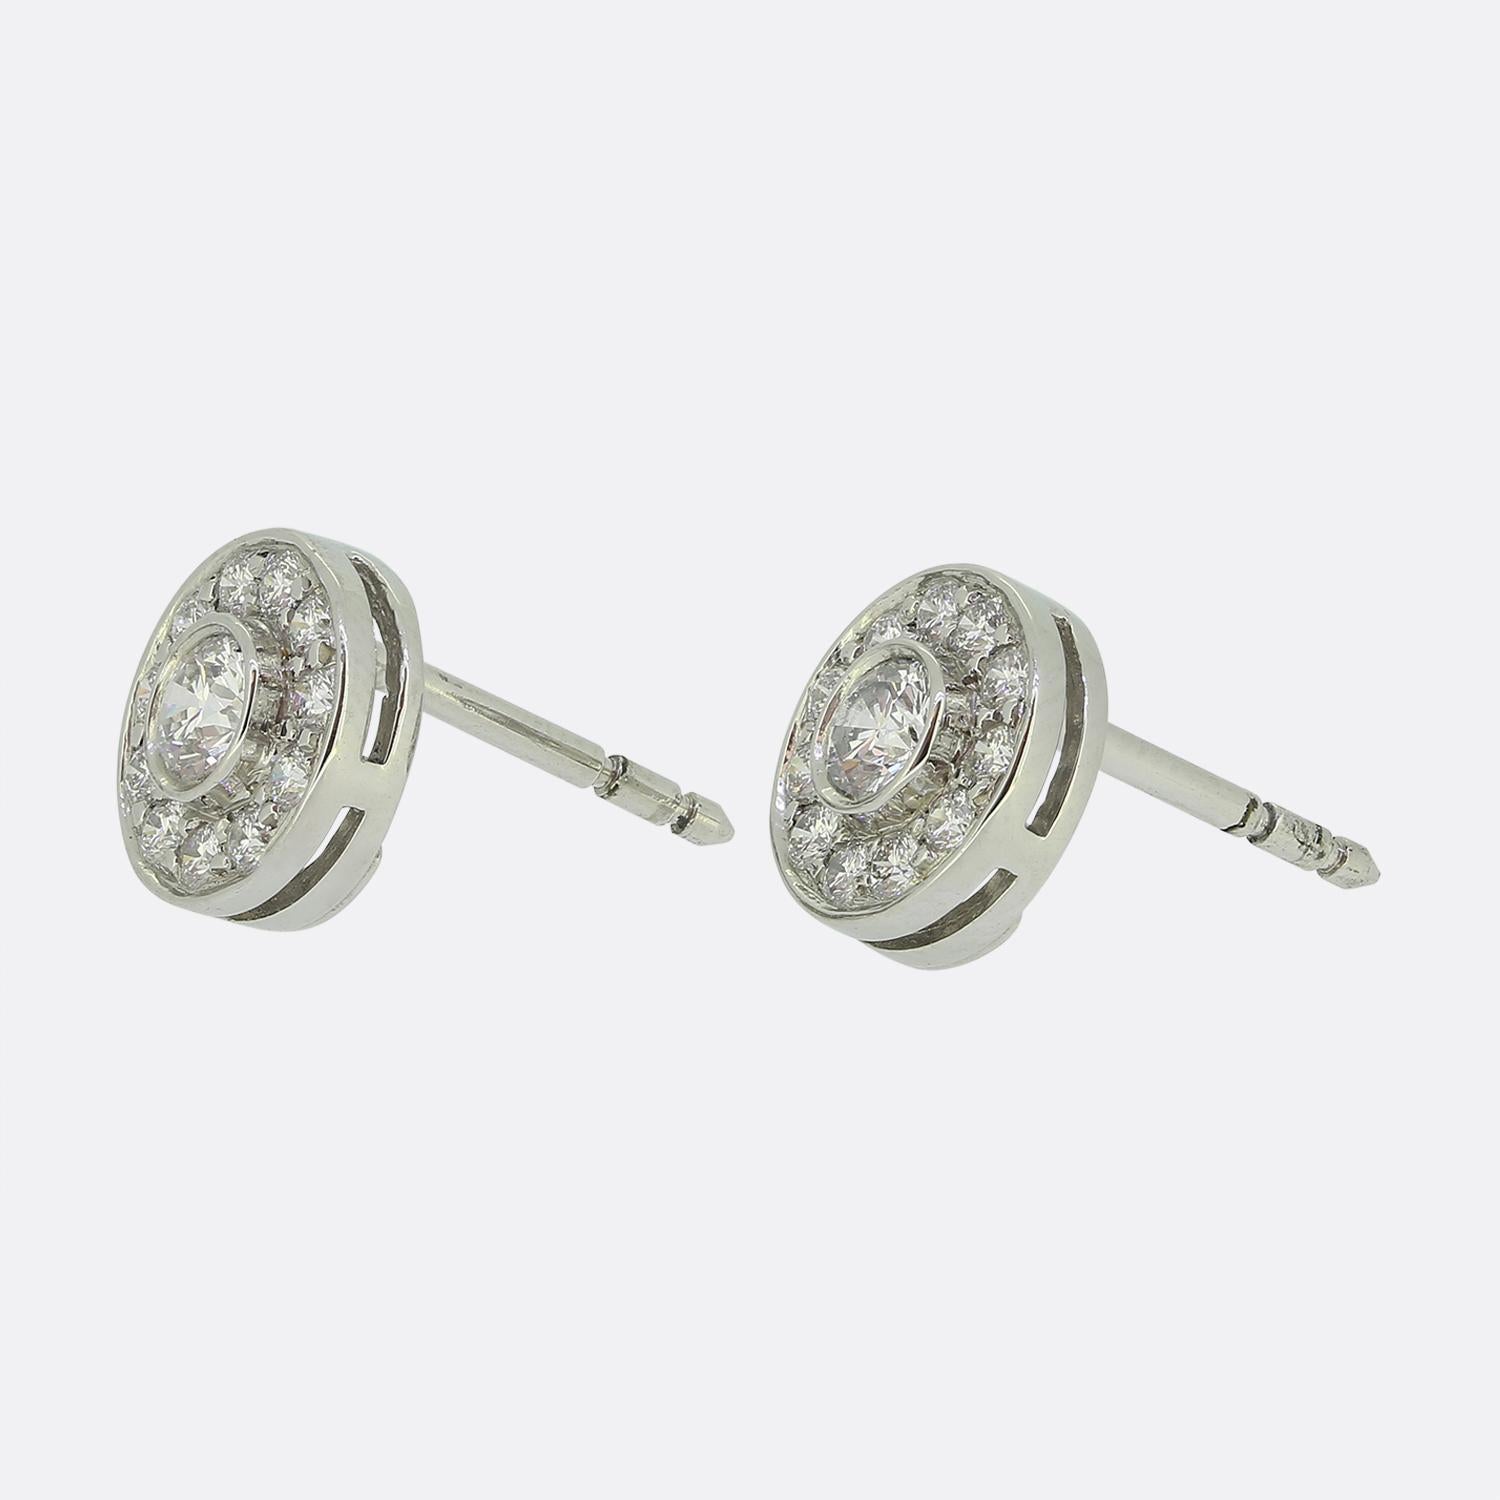 Here we have a wonderful pair of diamond earrings from the luxury jewellery designer Tiffany & Co. Each earring features a central diamond surrounded by a halo of 11 smaller diamonds. The earrings form part of the circlet collection and are perfect